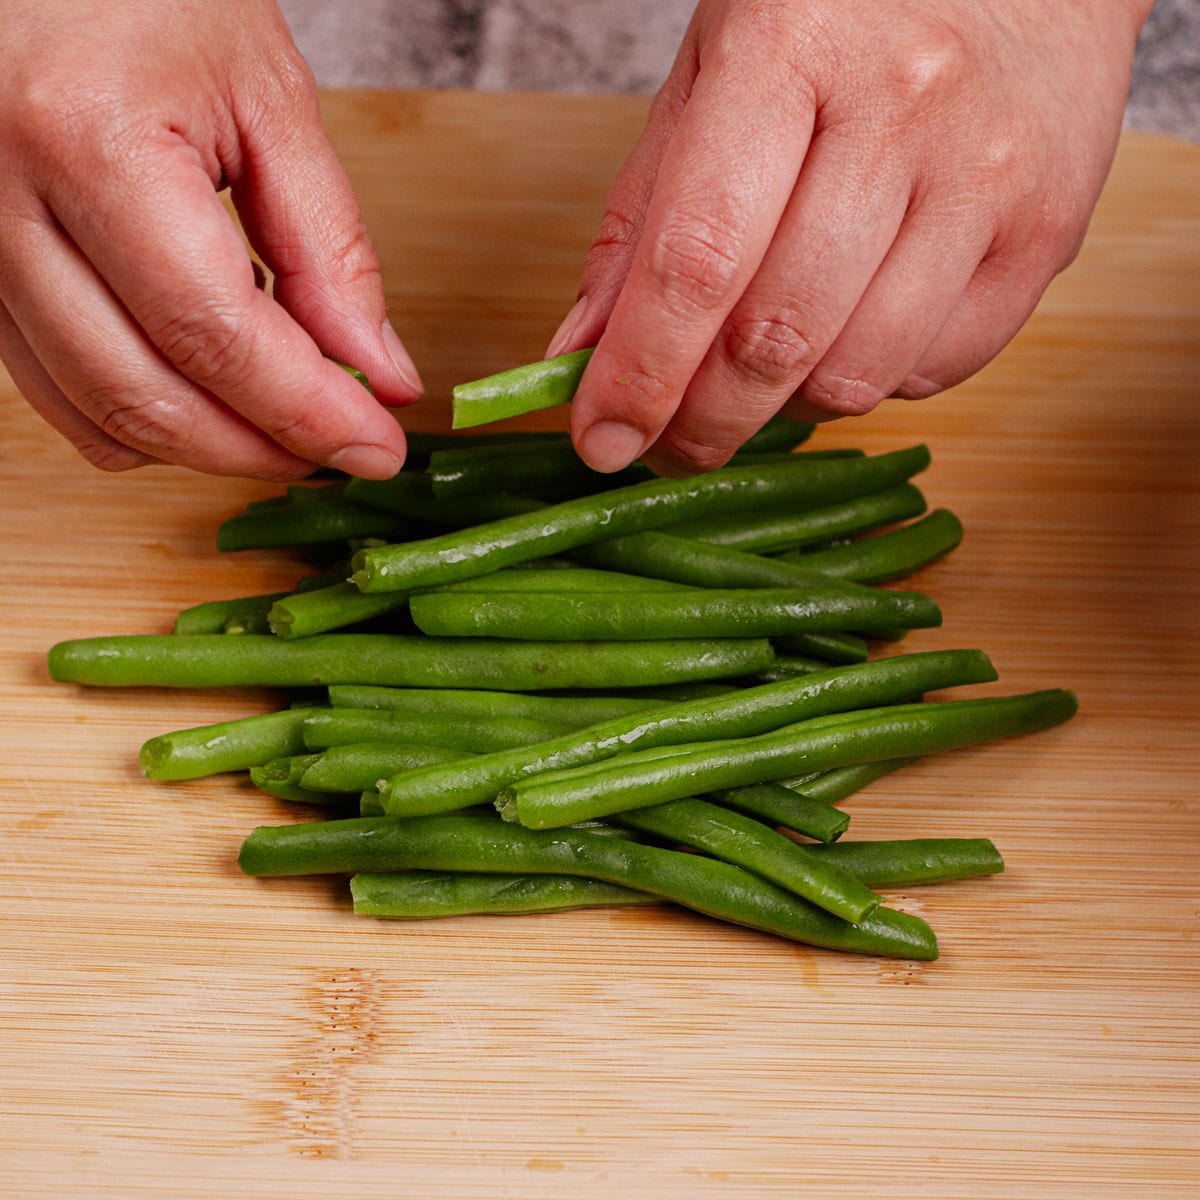 Trimming ends of french green beans